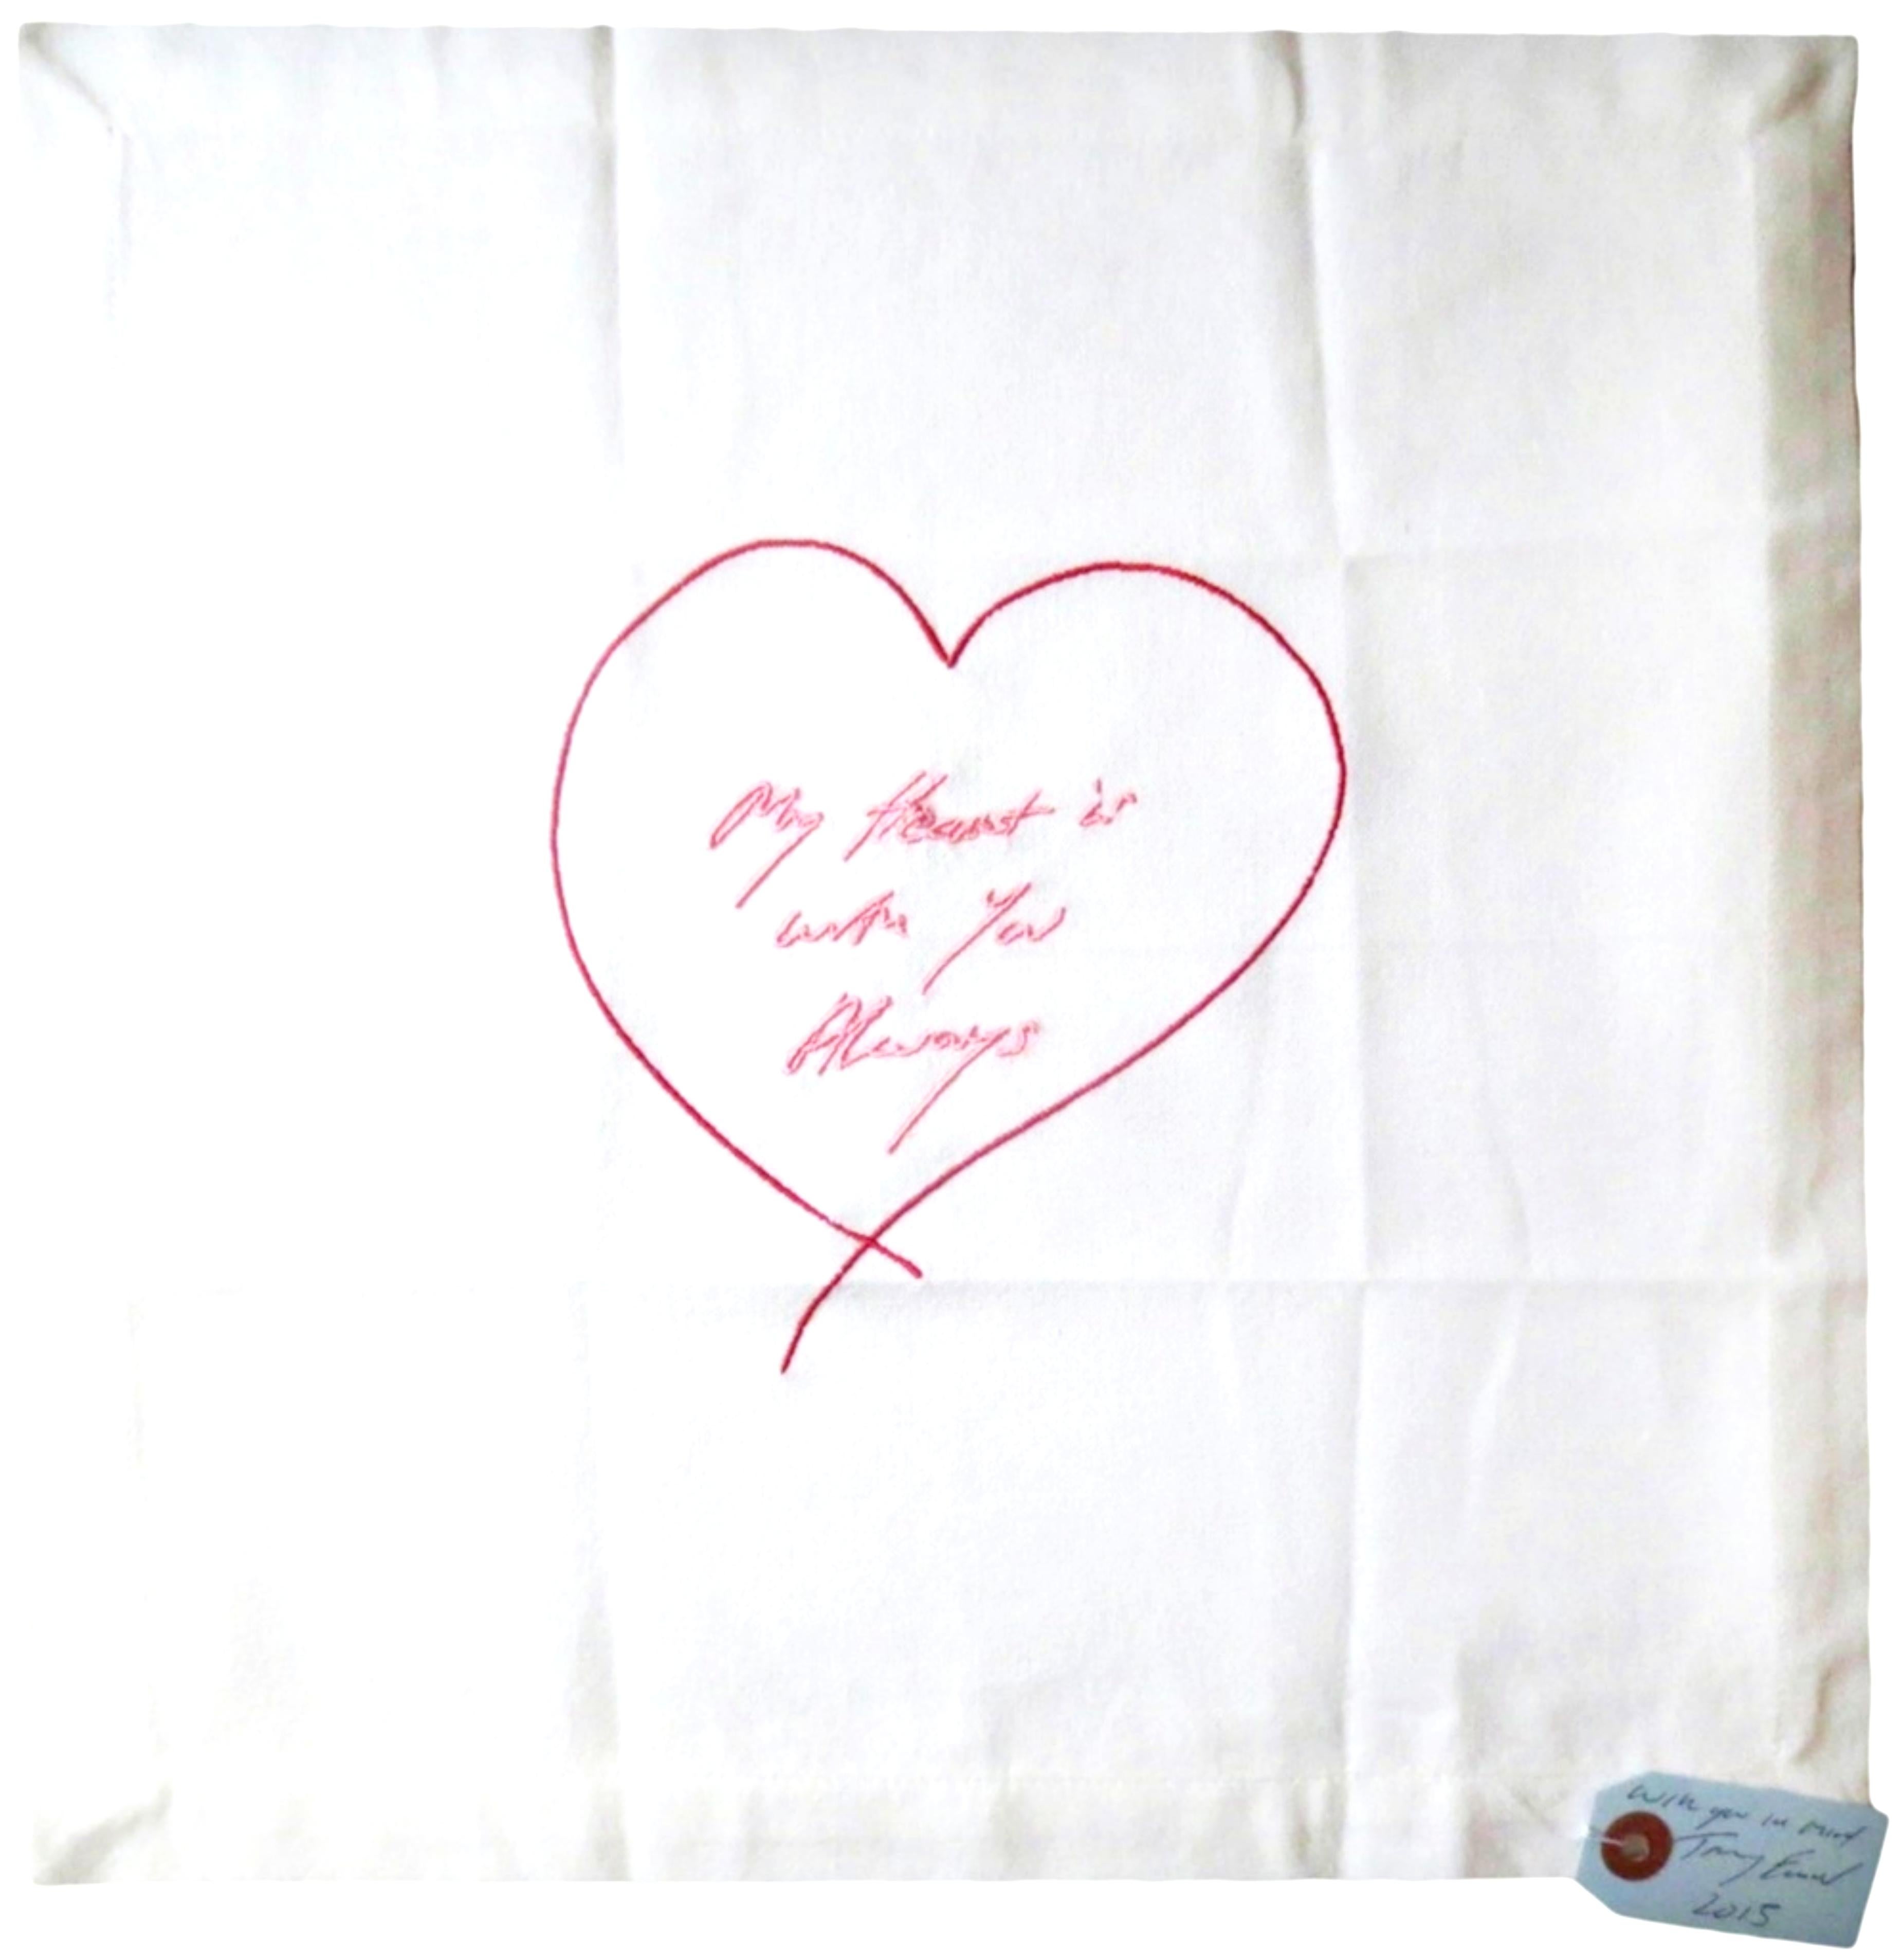 My Heart is With You Always - Art by Tracey Emin